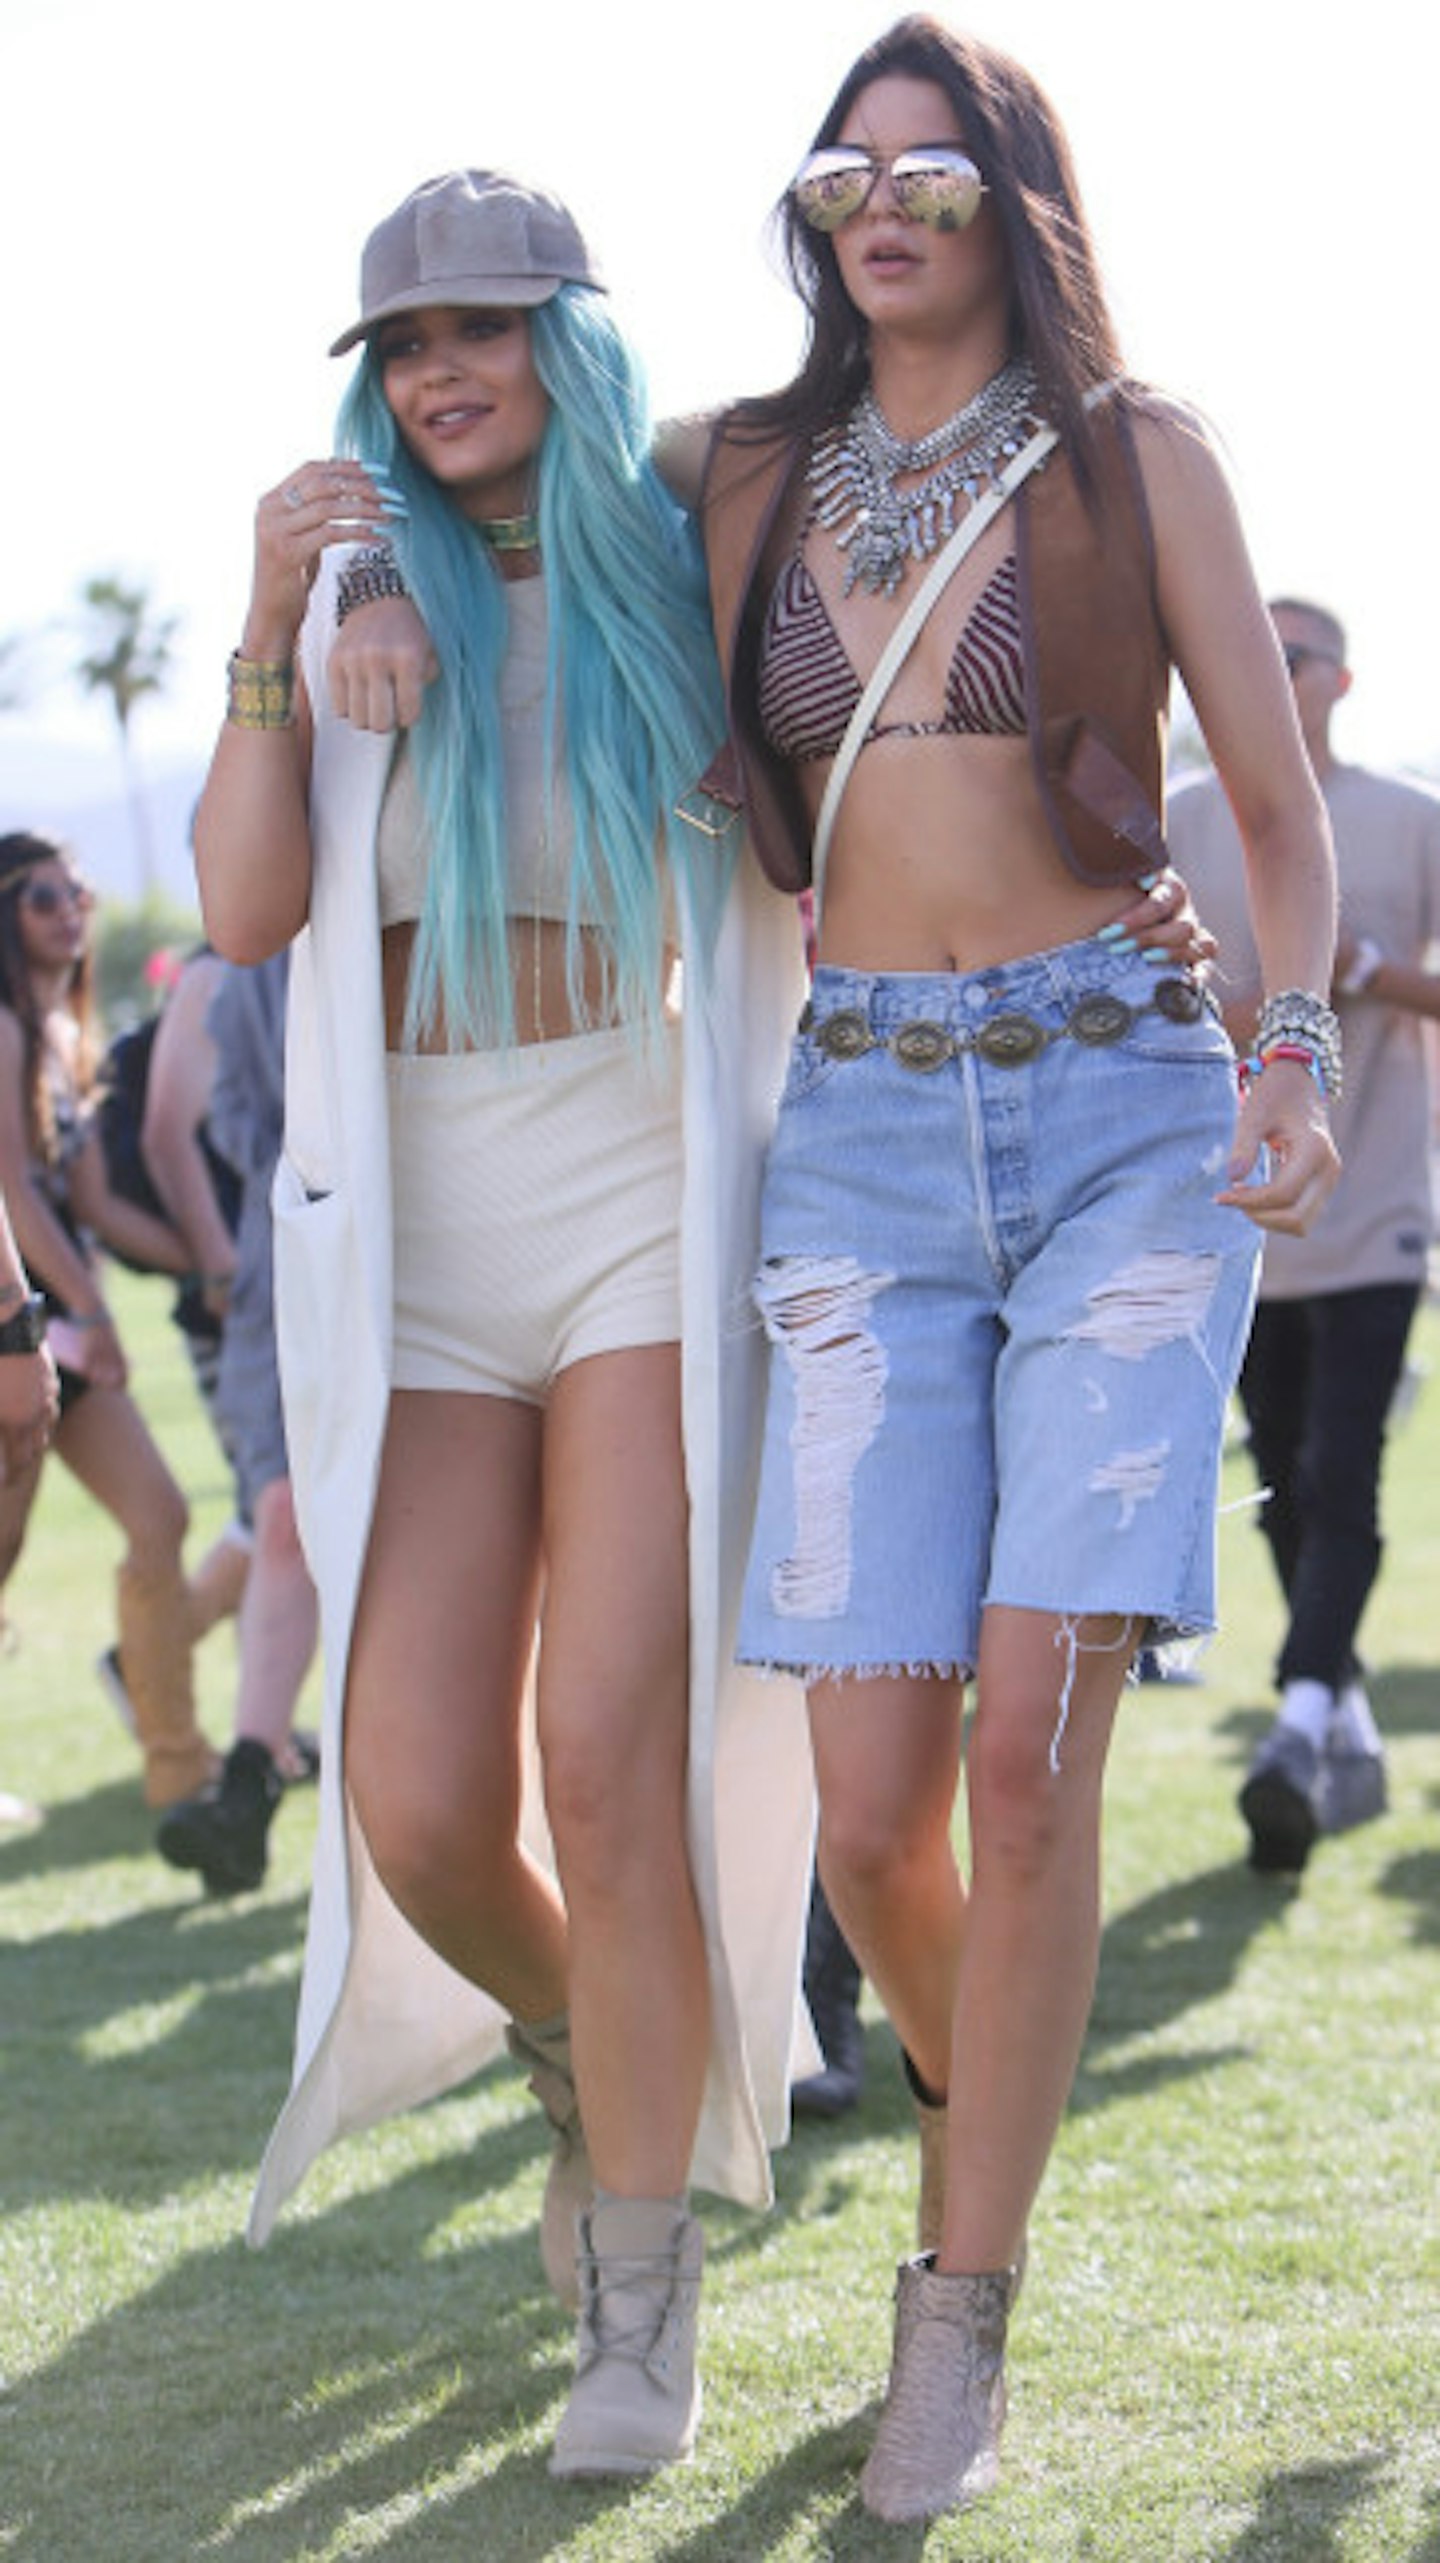 Kendall and Kylie want their names protected for use in the entertainment industry